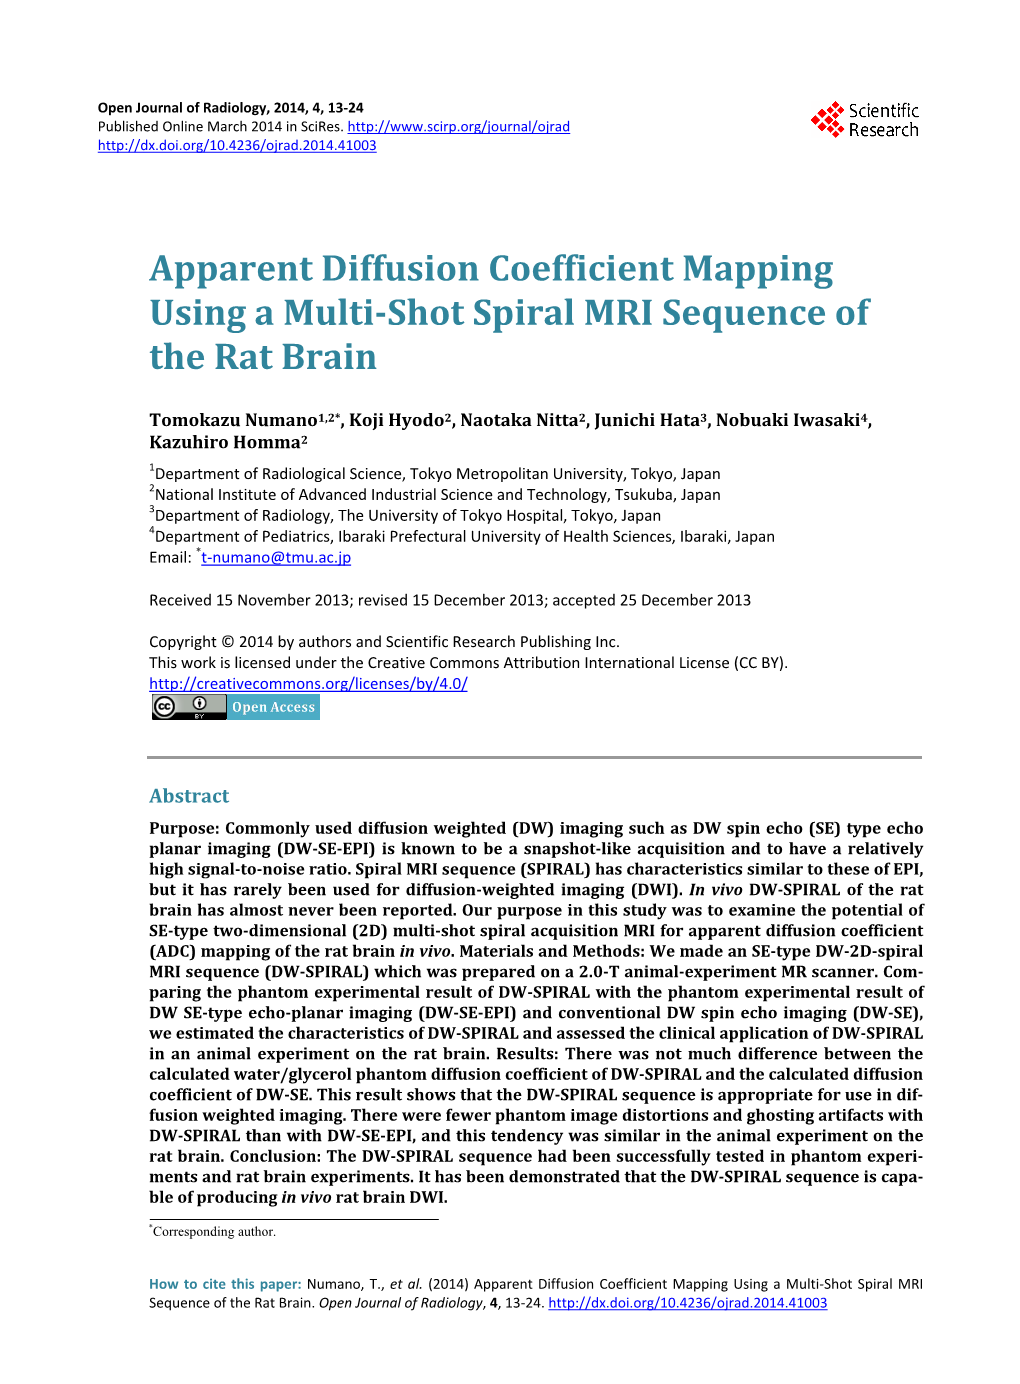 Apparent Diffusion Coefficient Mapping Using a Multi-Shot Spiral MRI Sequence of the Rat Brain